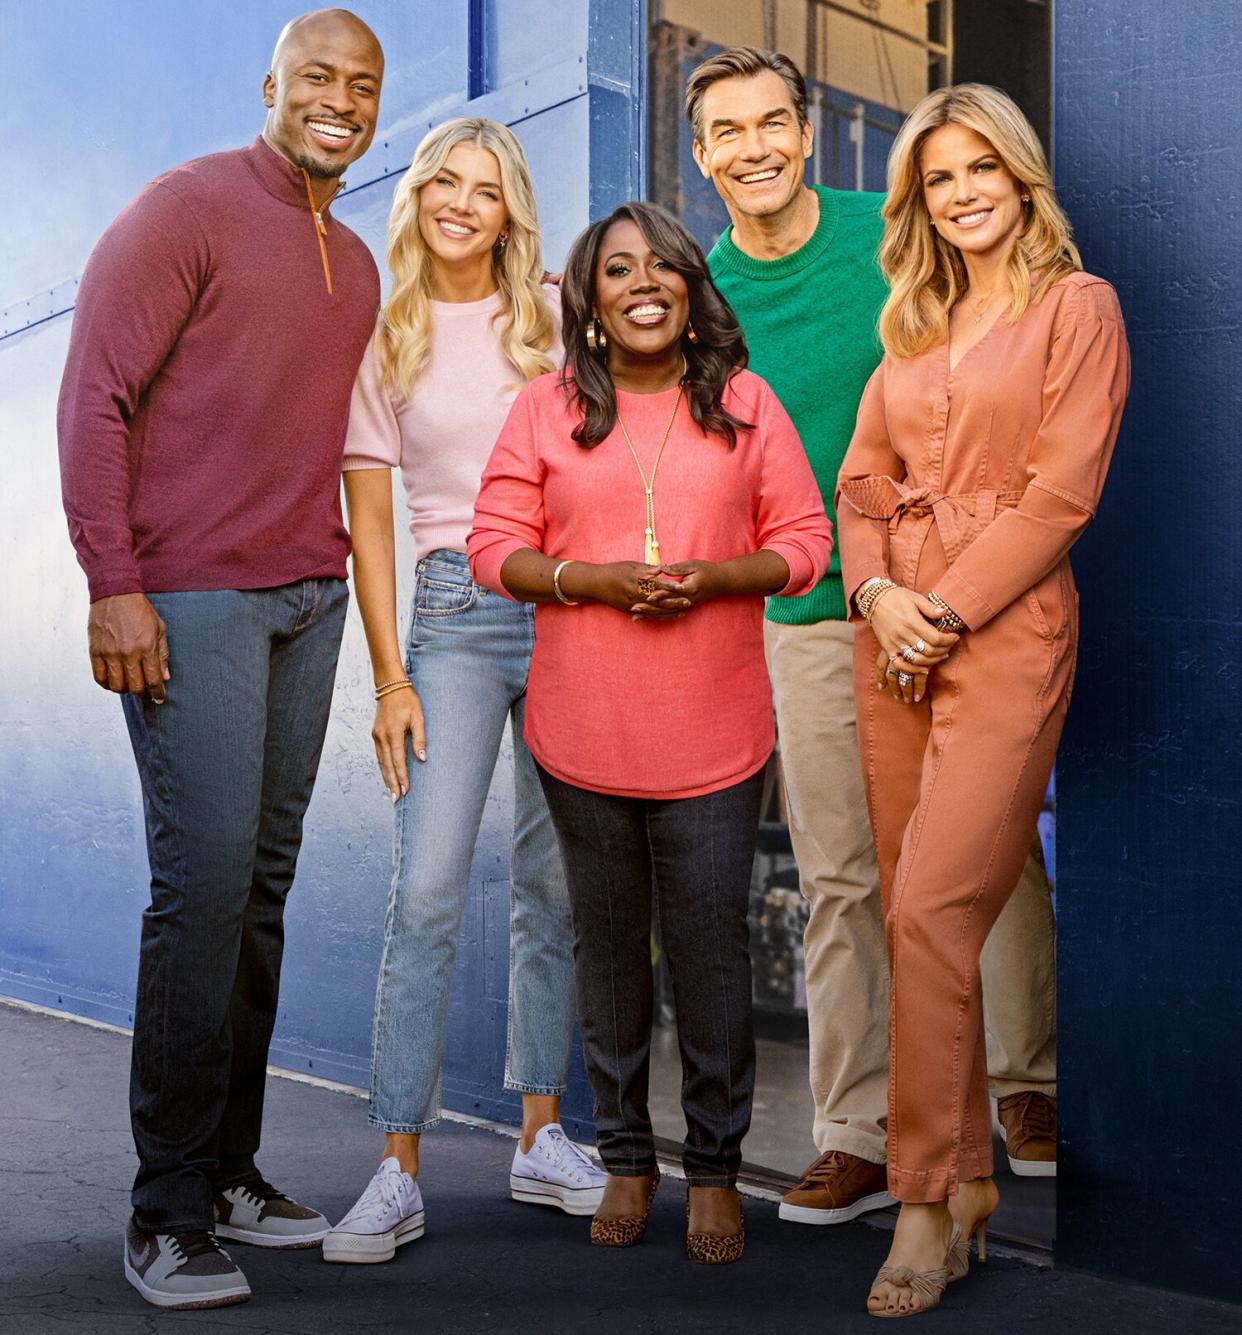 Akbar Gbajabiamila, Amanda Kloots, Sheryl Underwood, Jerry OConnell &amp; Natalie Morales hosts of the CBS daytime series THE TALK, scheduled to air on the CBS Television Network